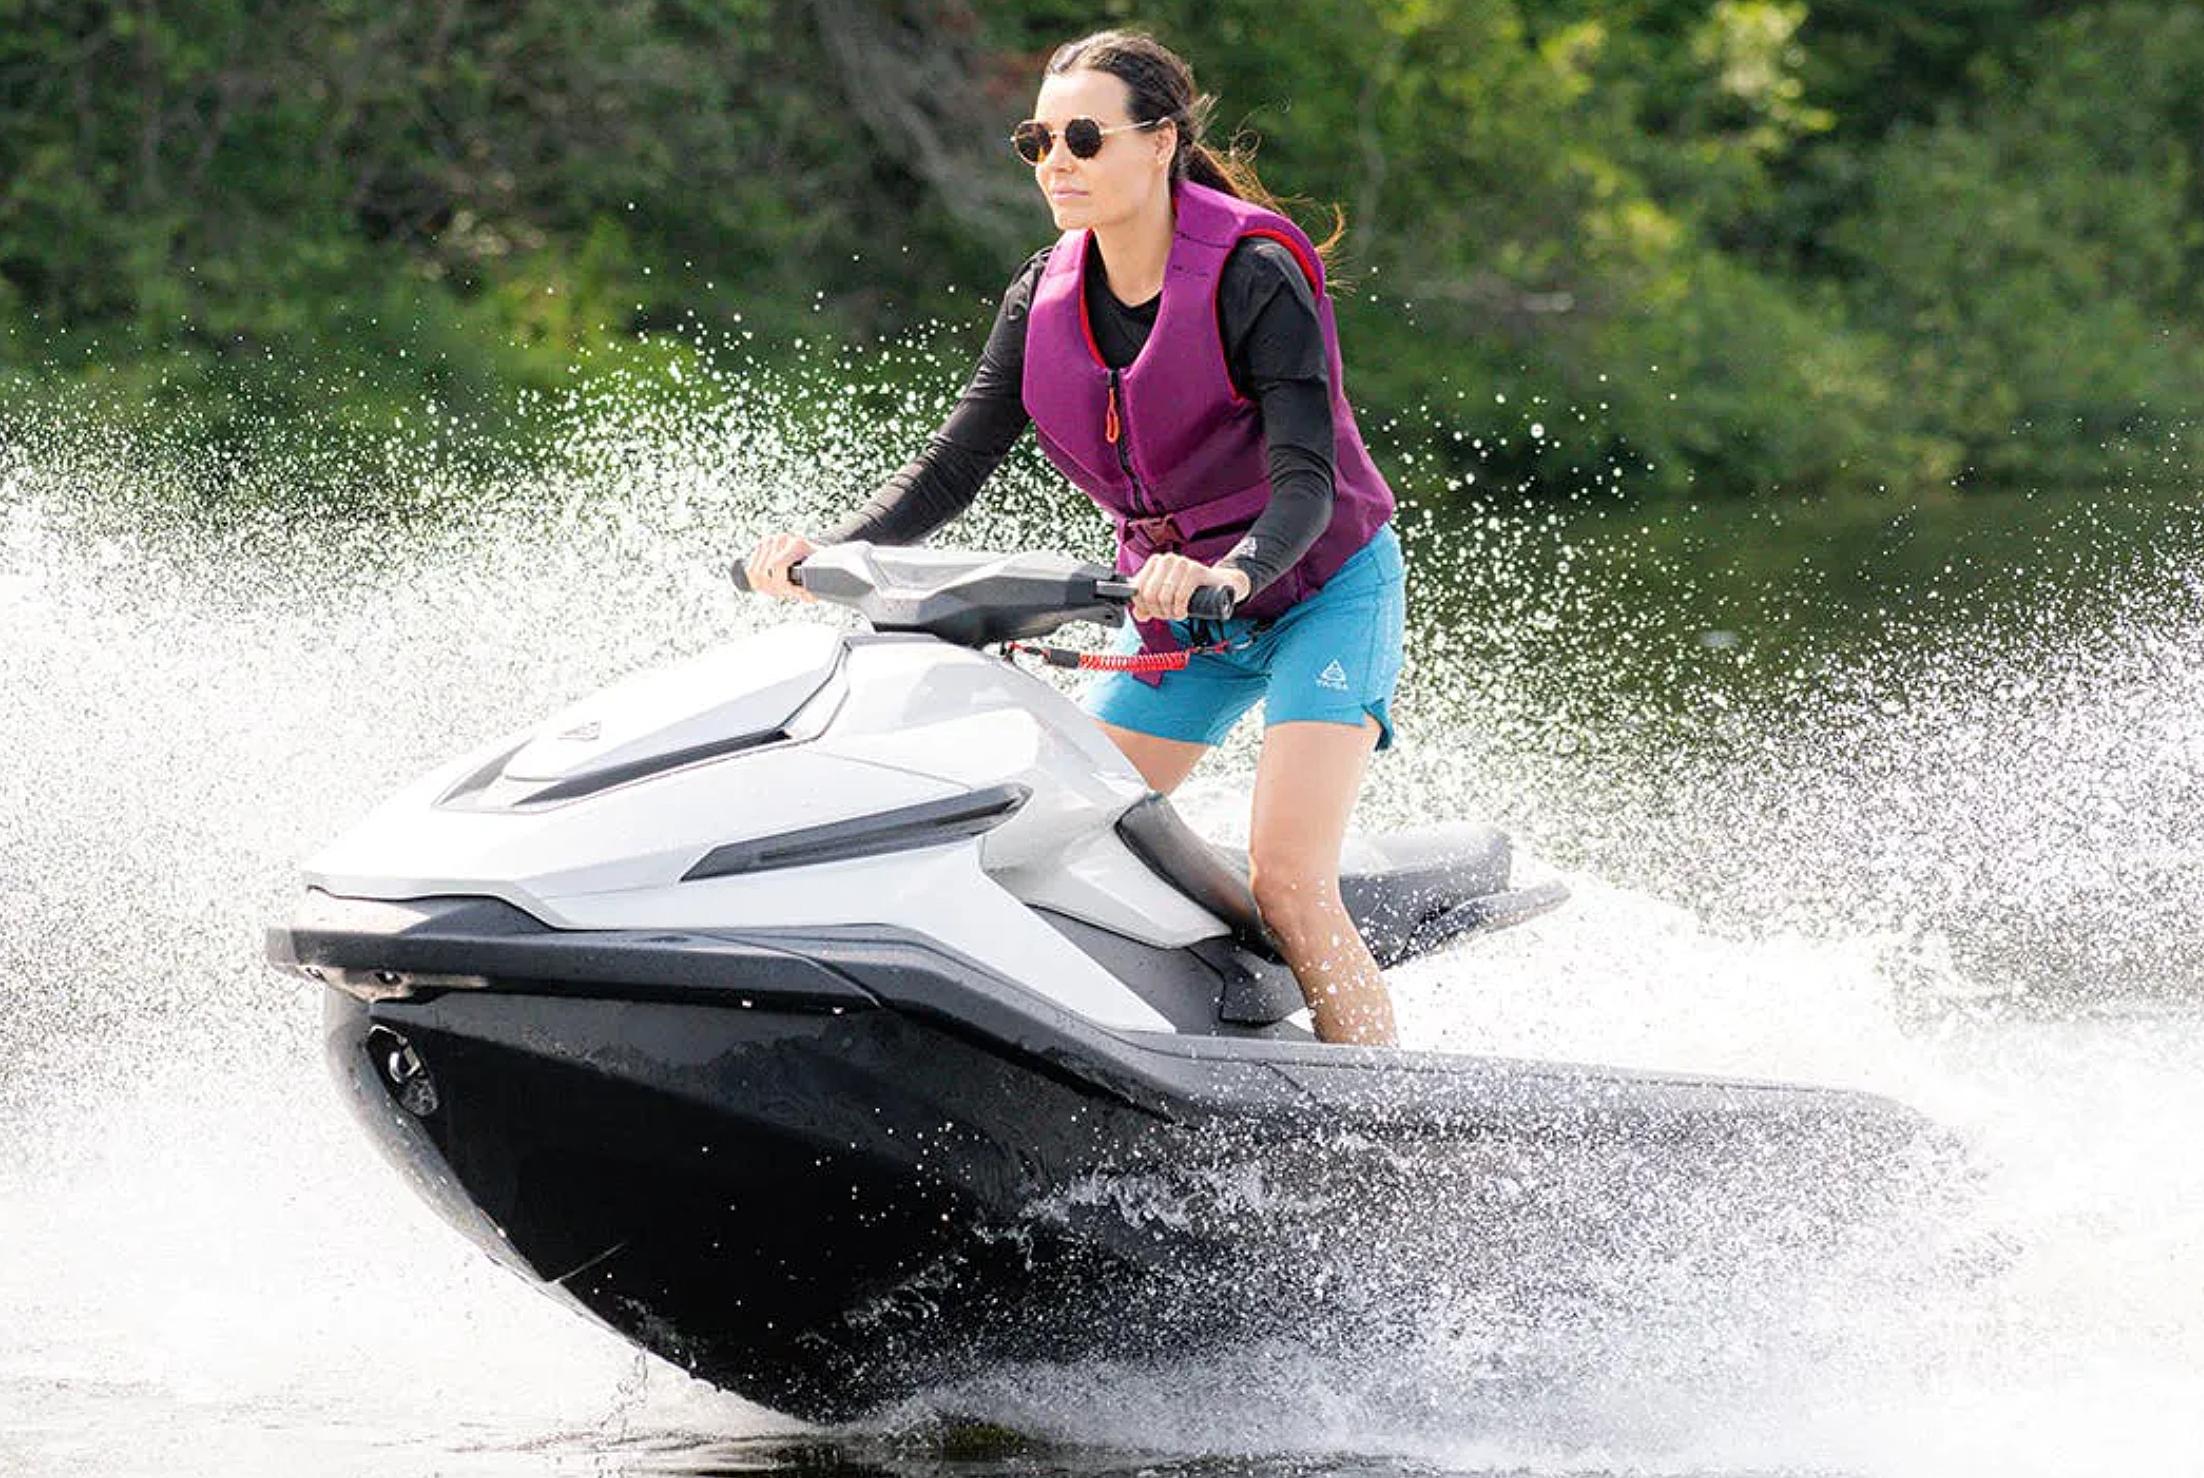 Battery-operated watercraft in the Northland are becoming popular